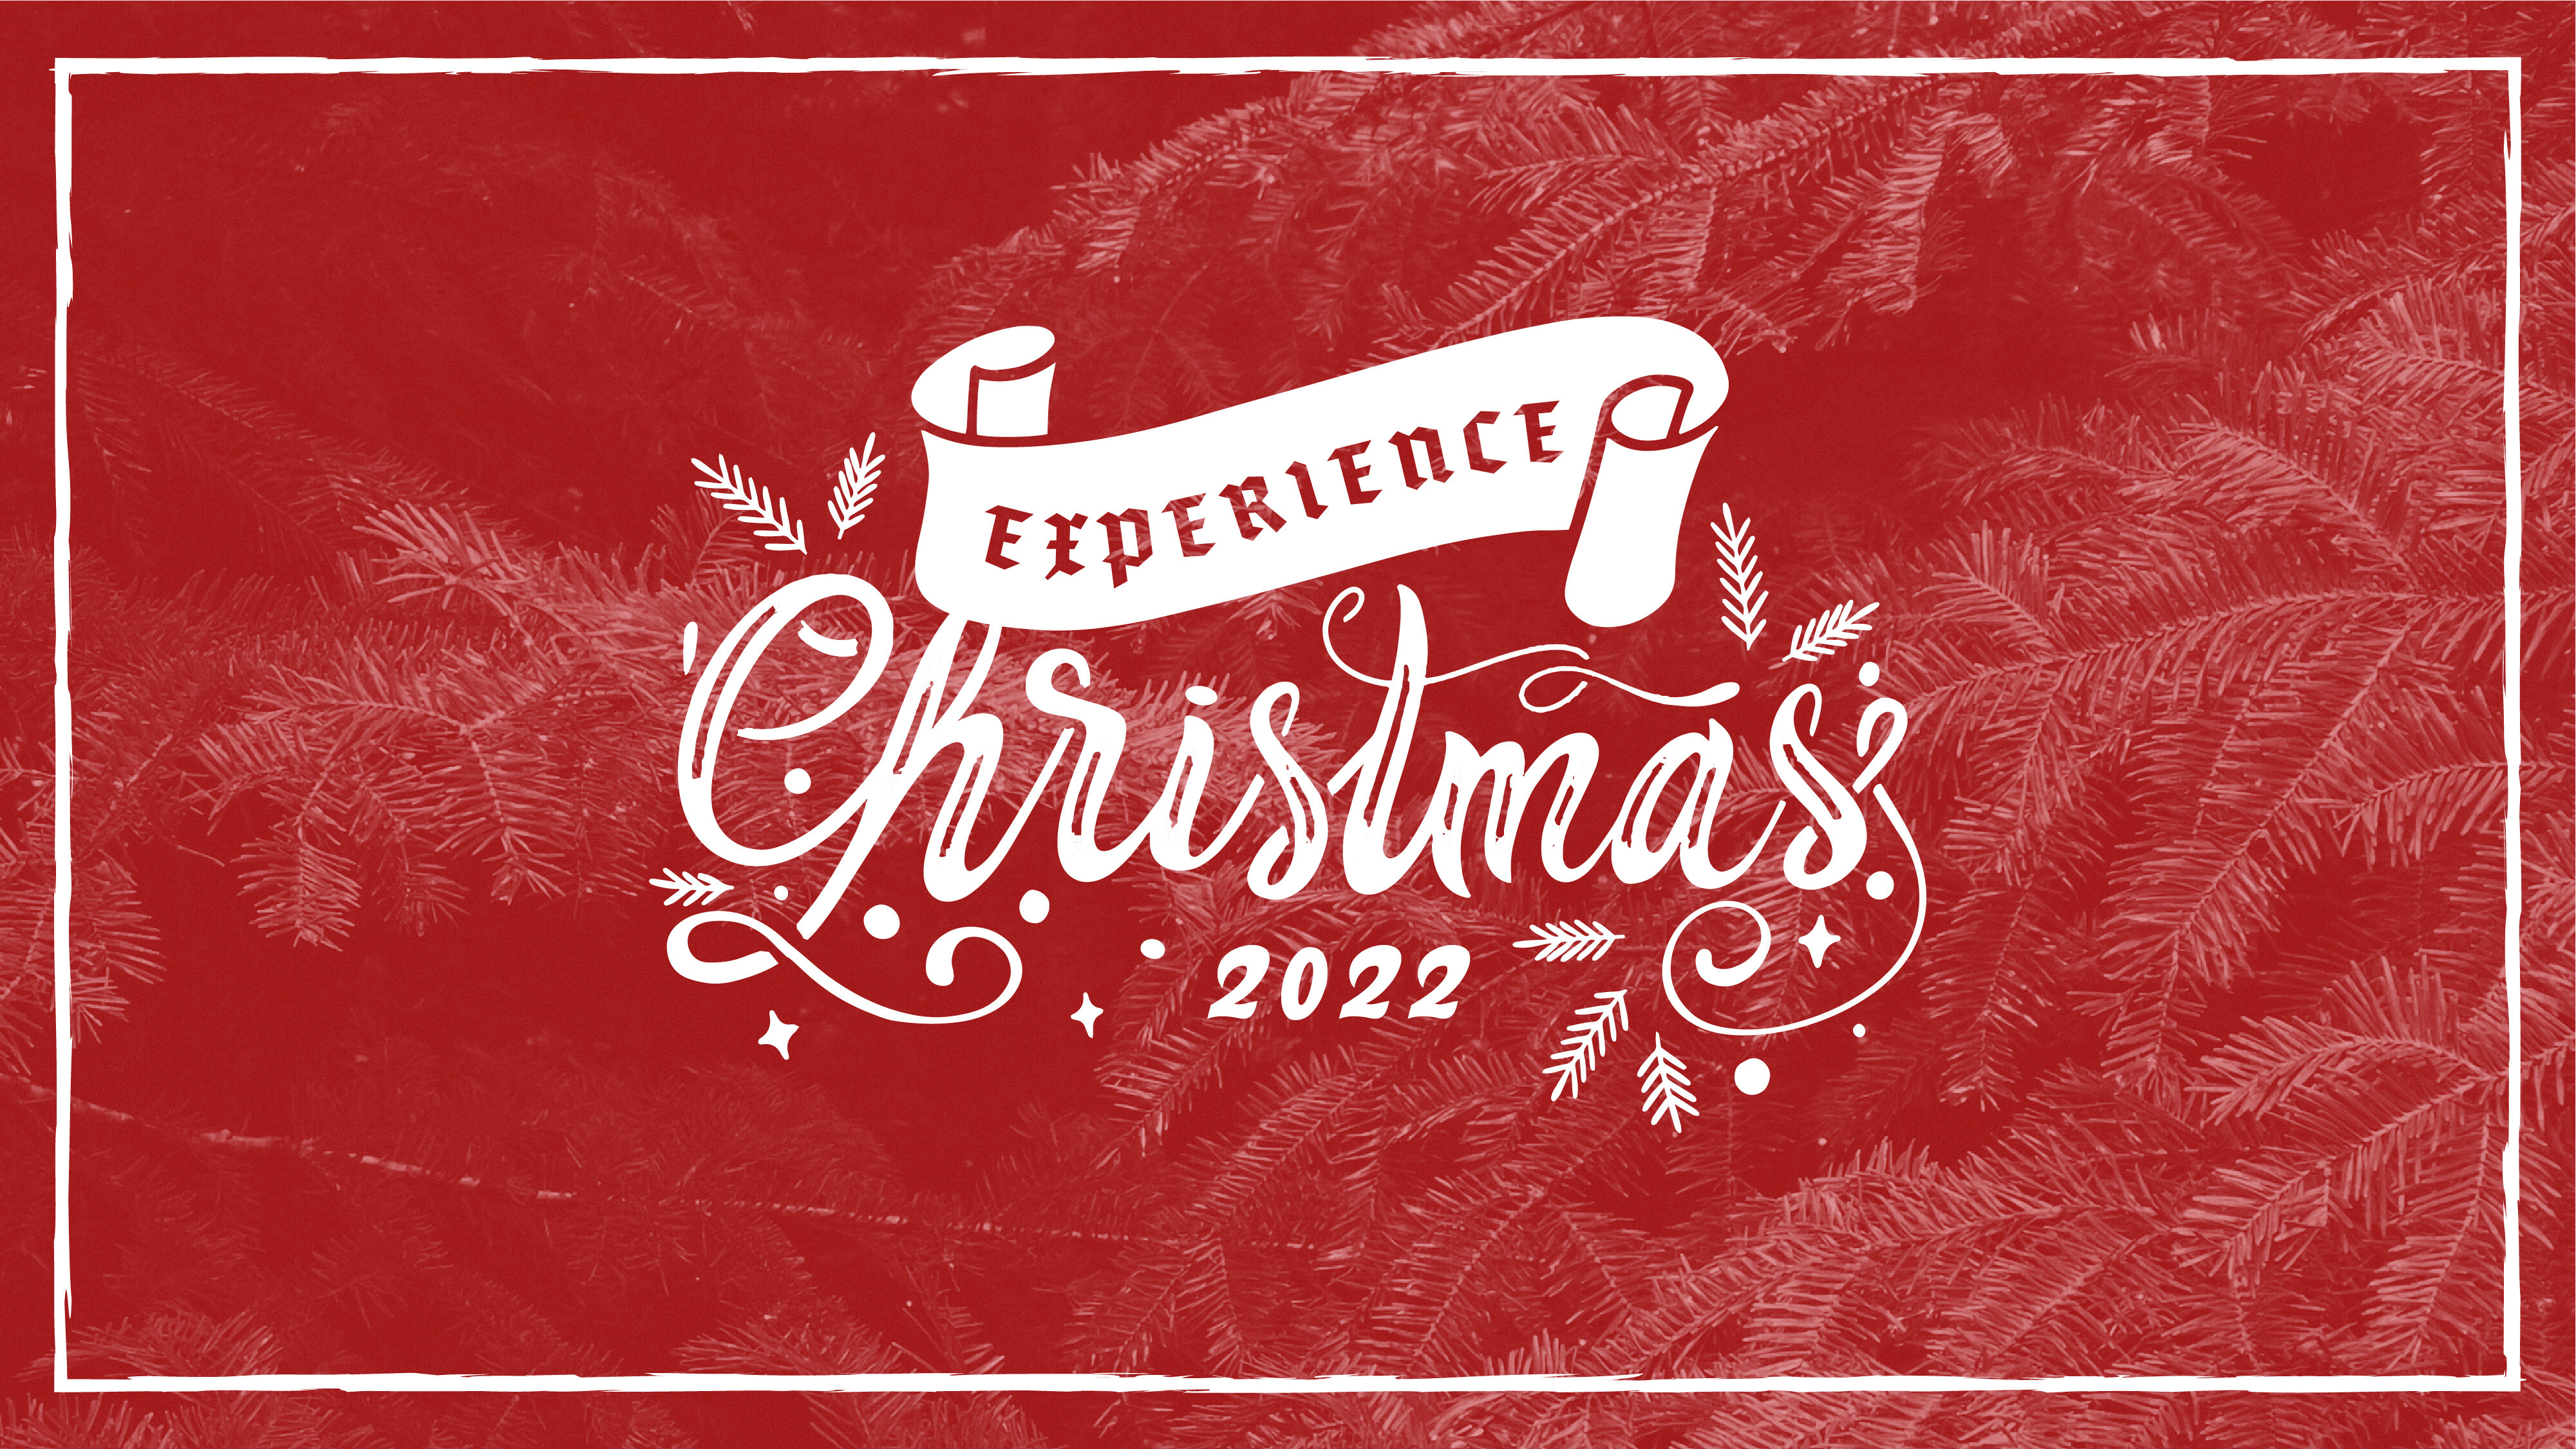 Experience Christmas | Cannon County 